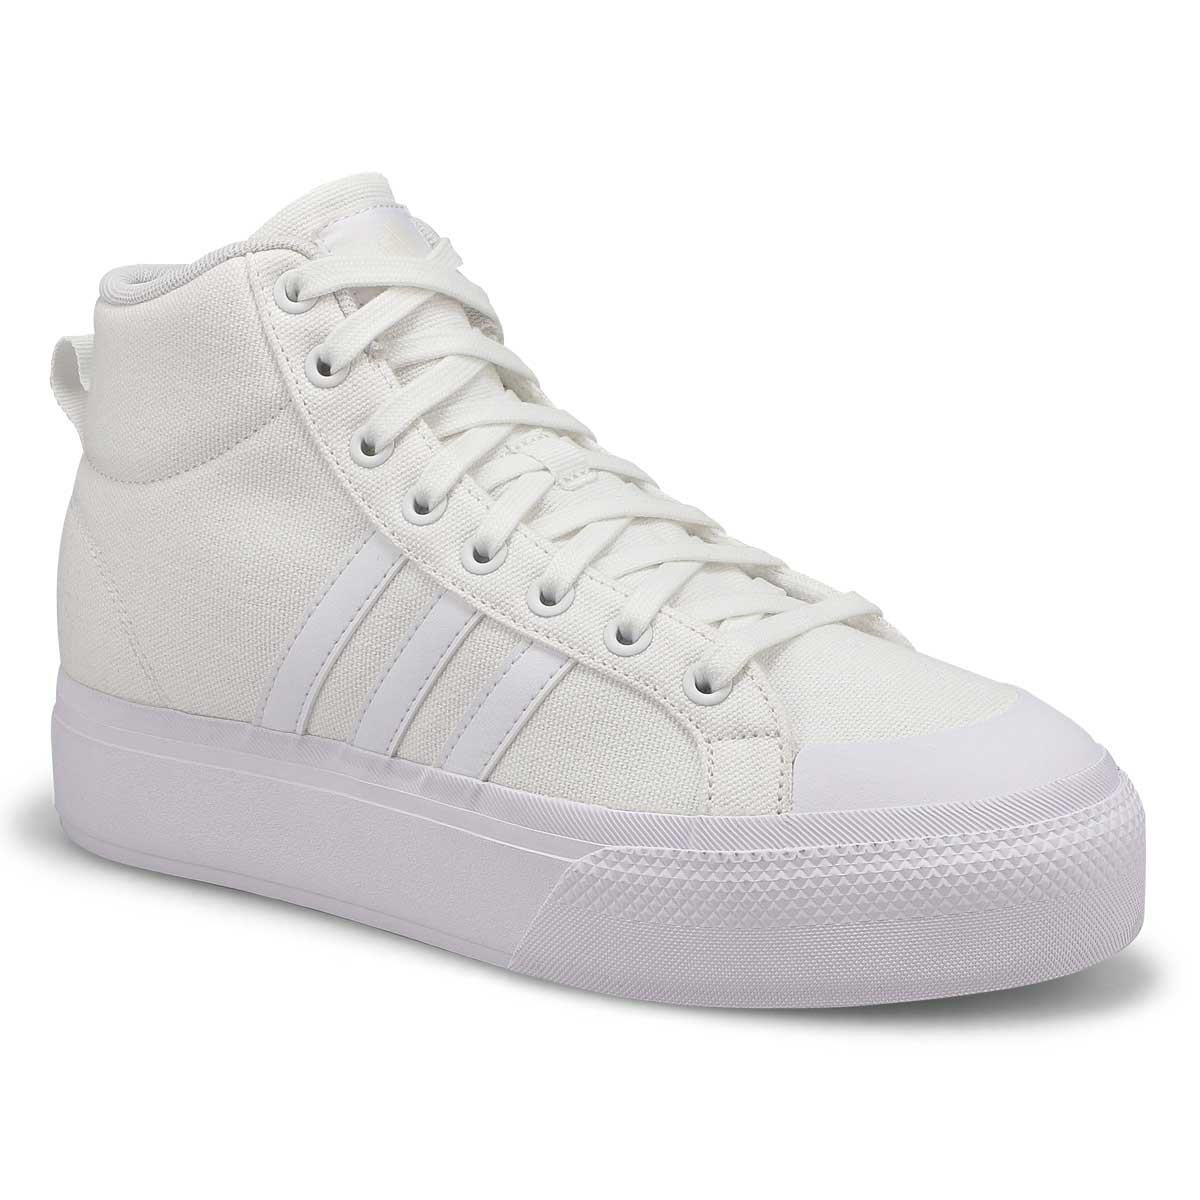 adidas, Shoes, Adidas Womens Bravada Sneakers Shoes Off White Gy542 Mid  Top Lace Up Size 0